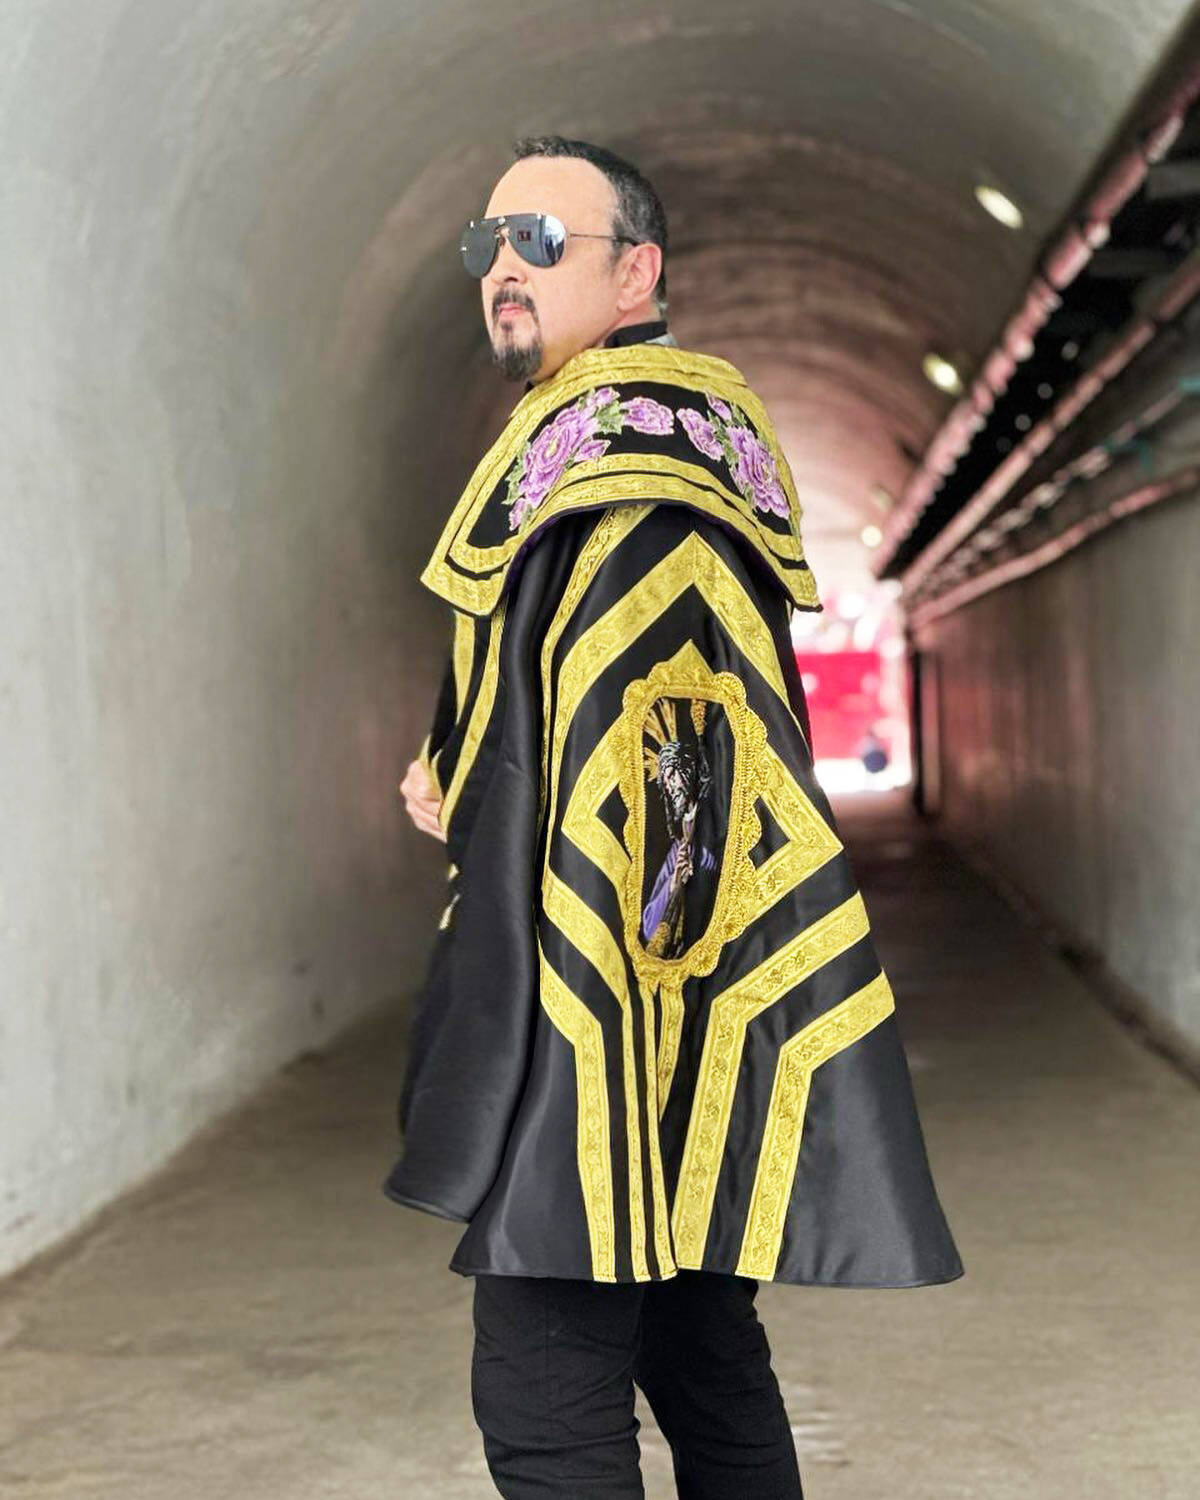 Pepe Aguilar will perform at 8 p.m. Saturday, Nov. 25 at the ShoWare Center in Kent. COURTESY PHOTO, Pepe Aguilar